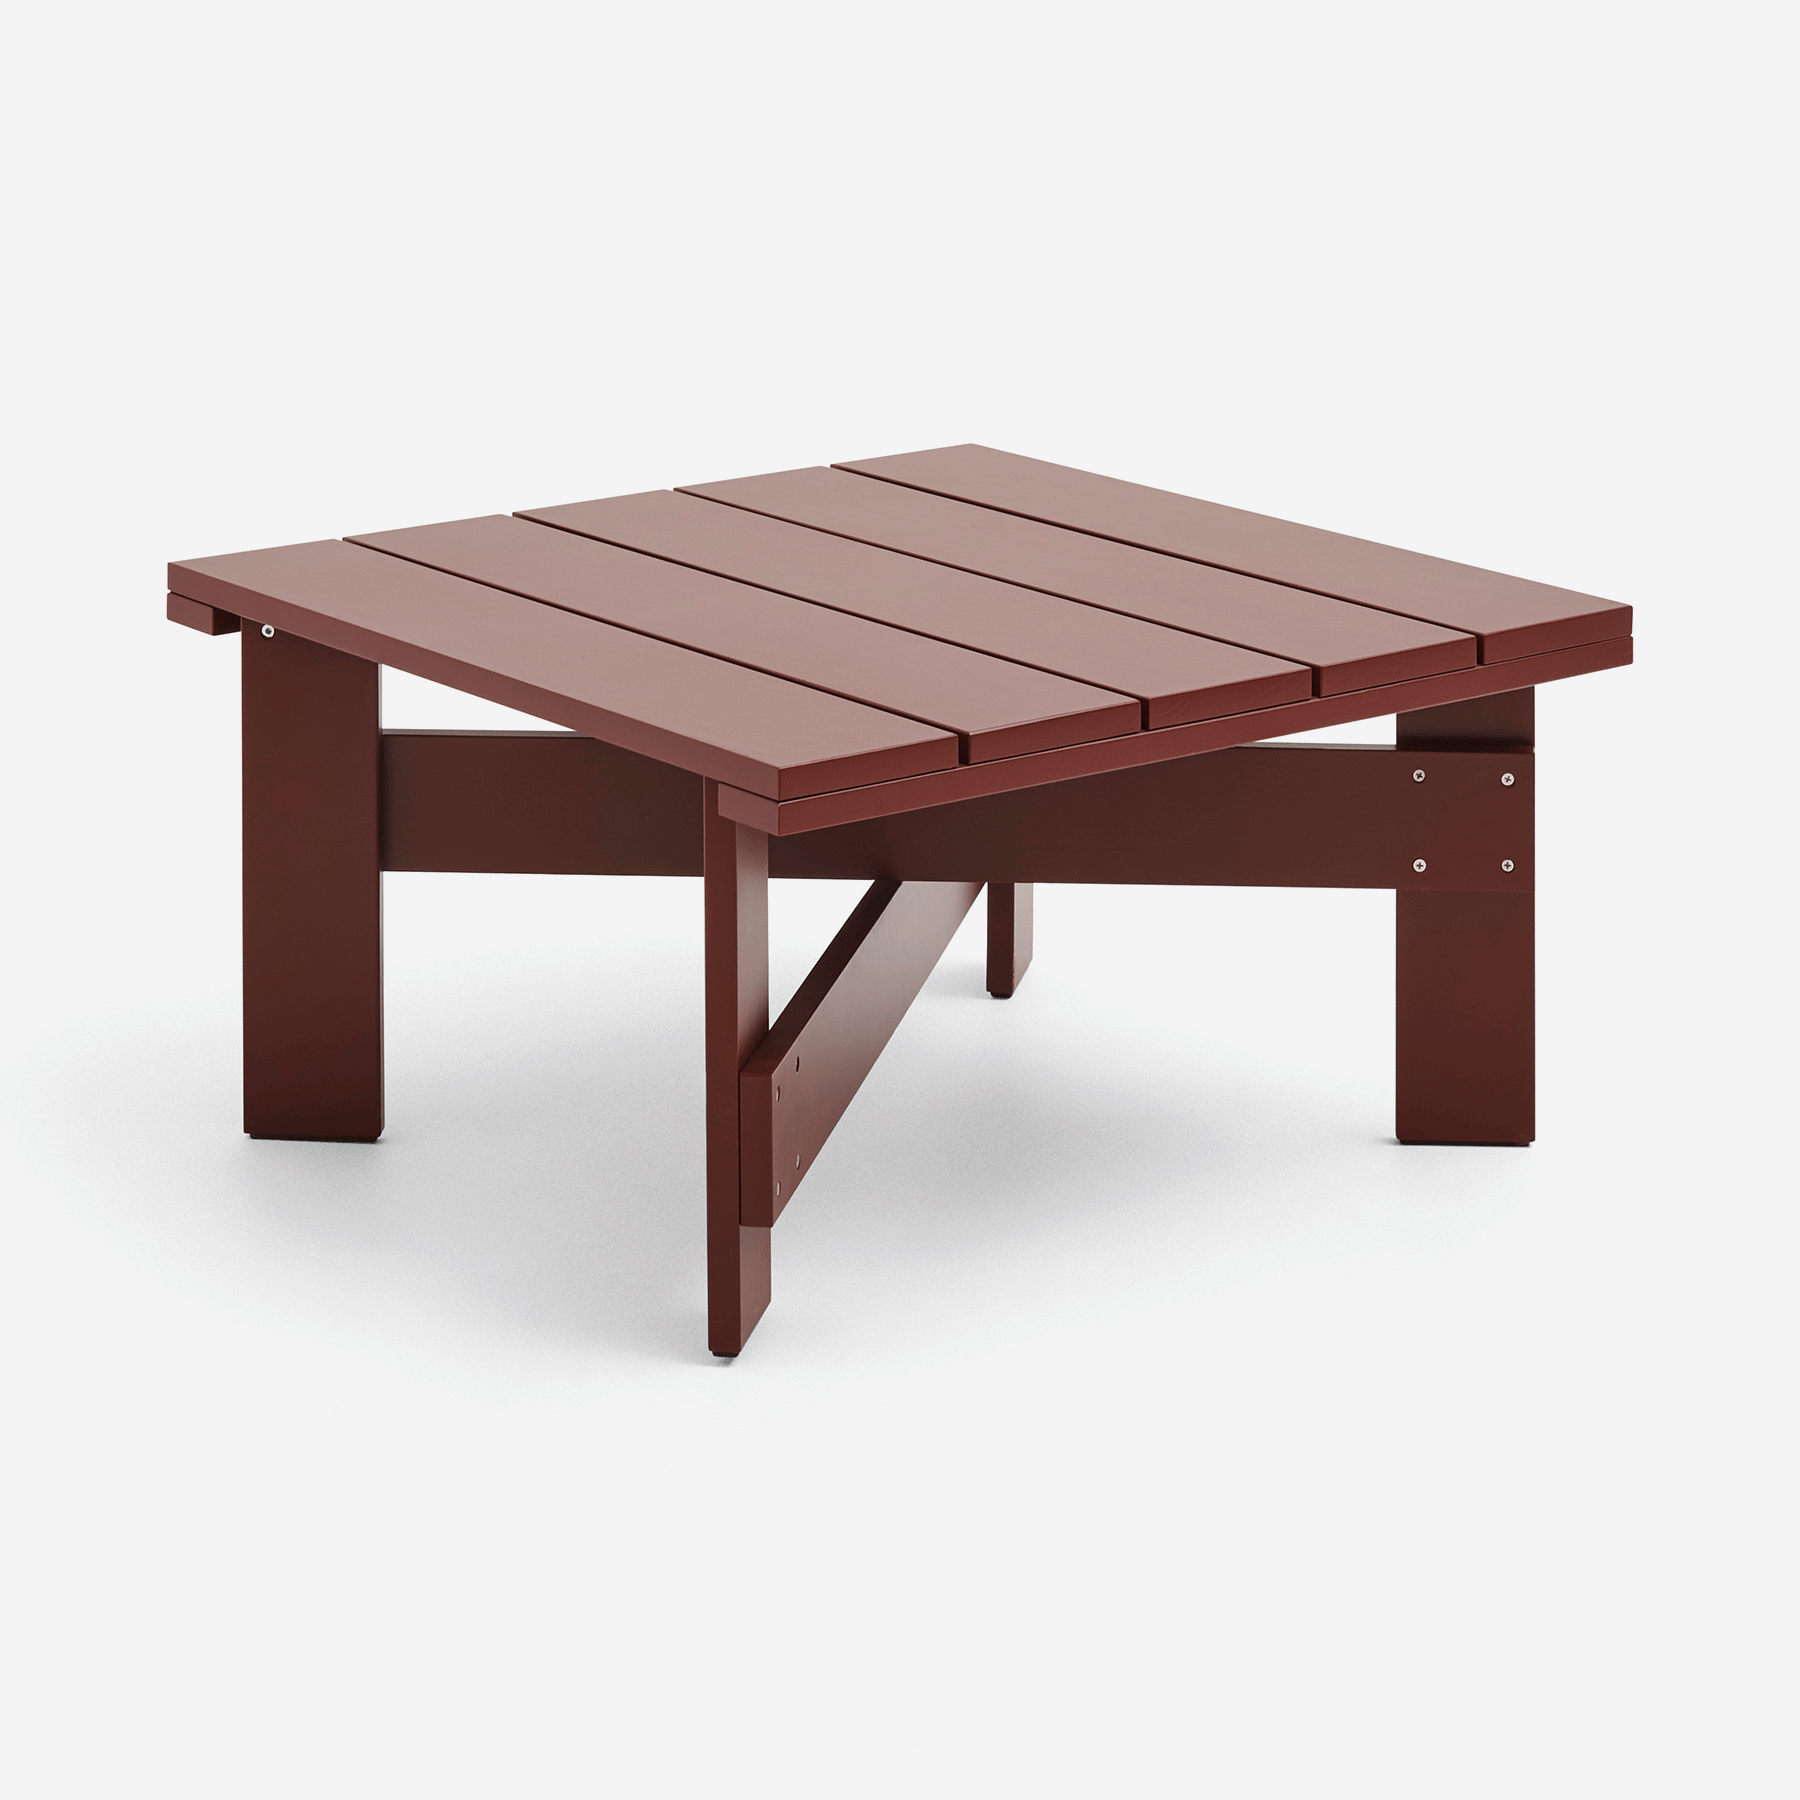 Crate Low Table, 75cm